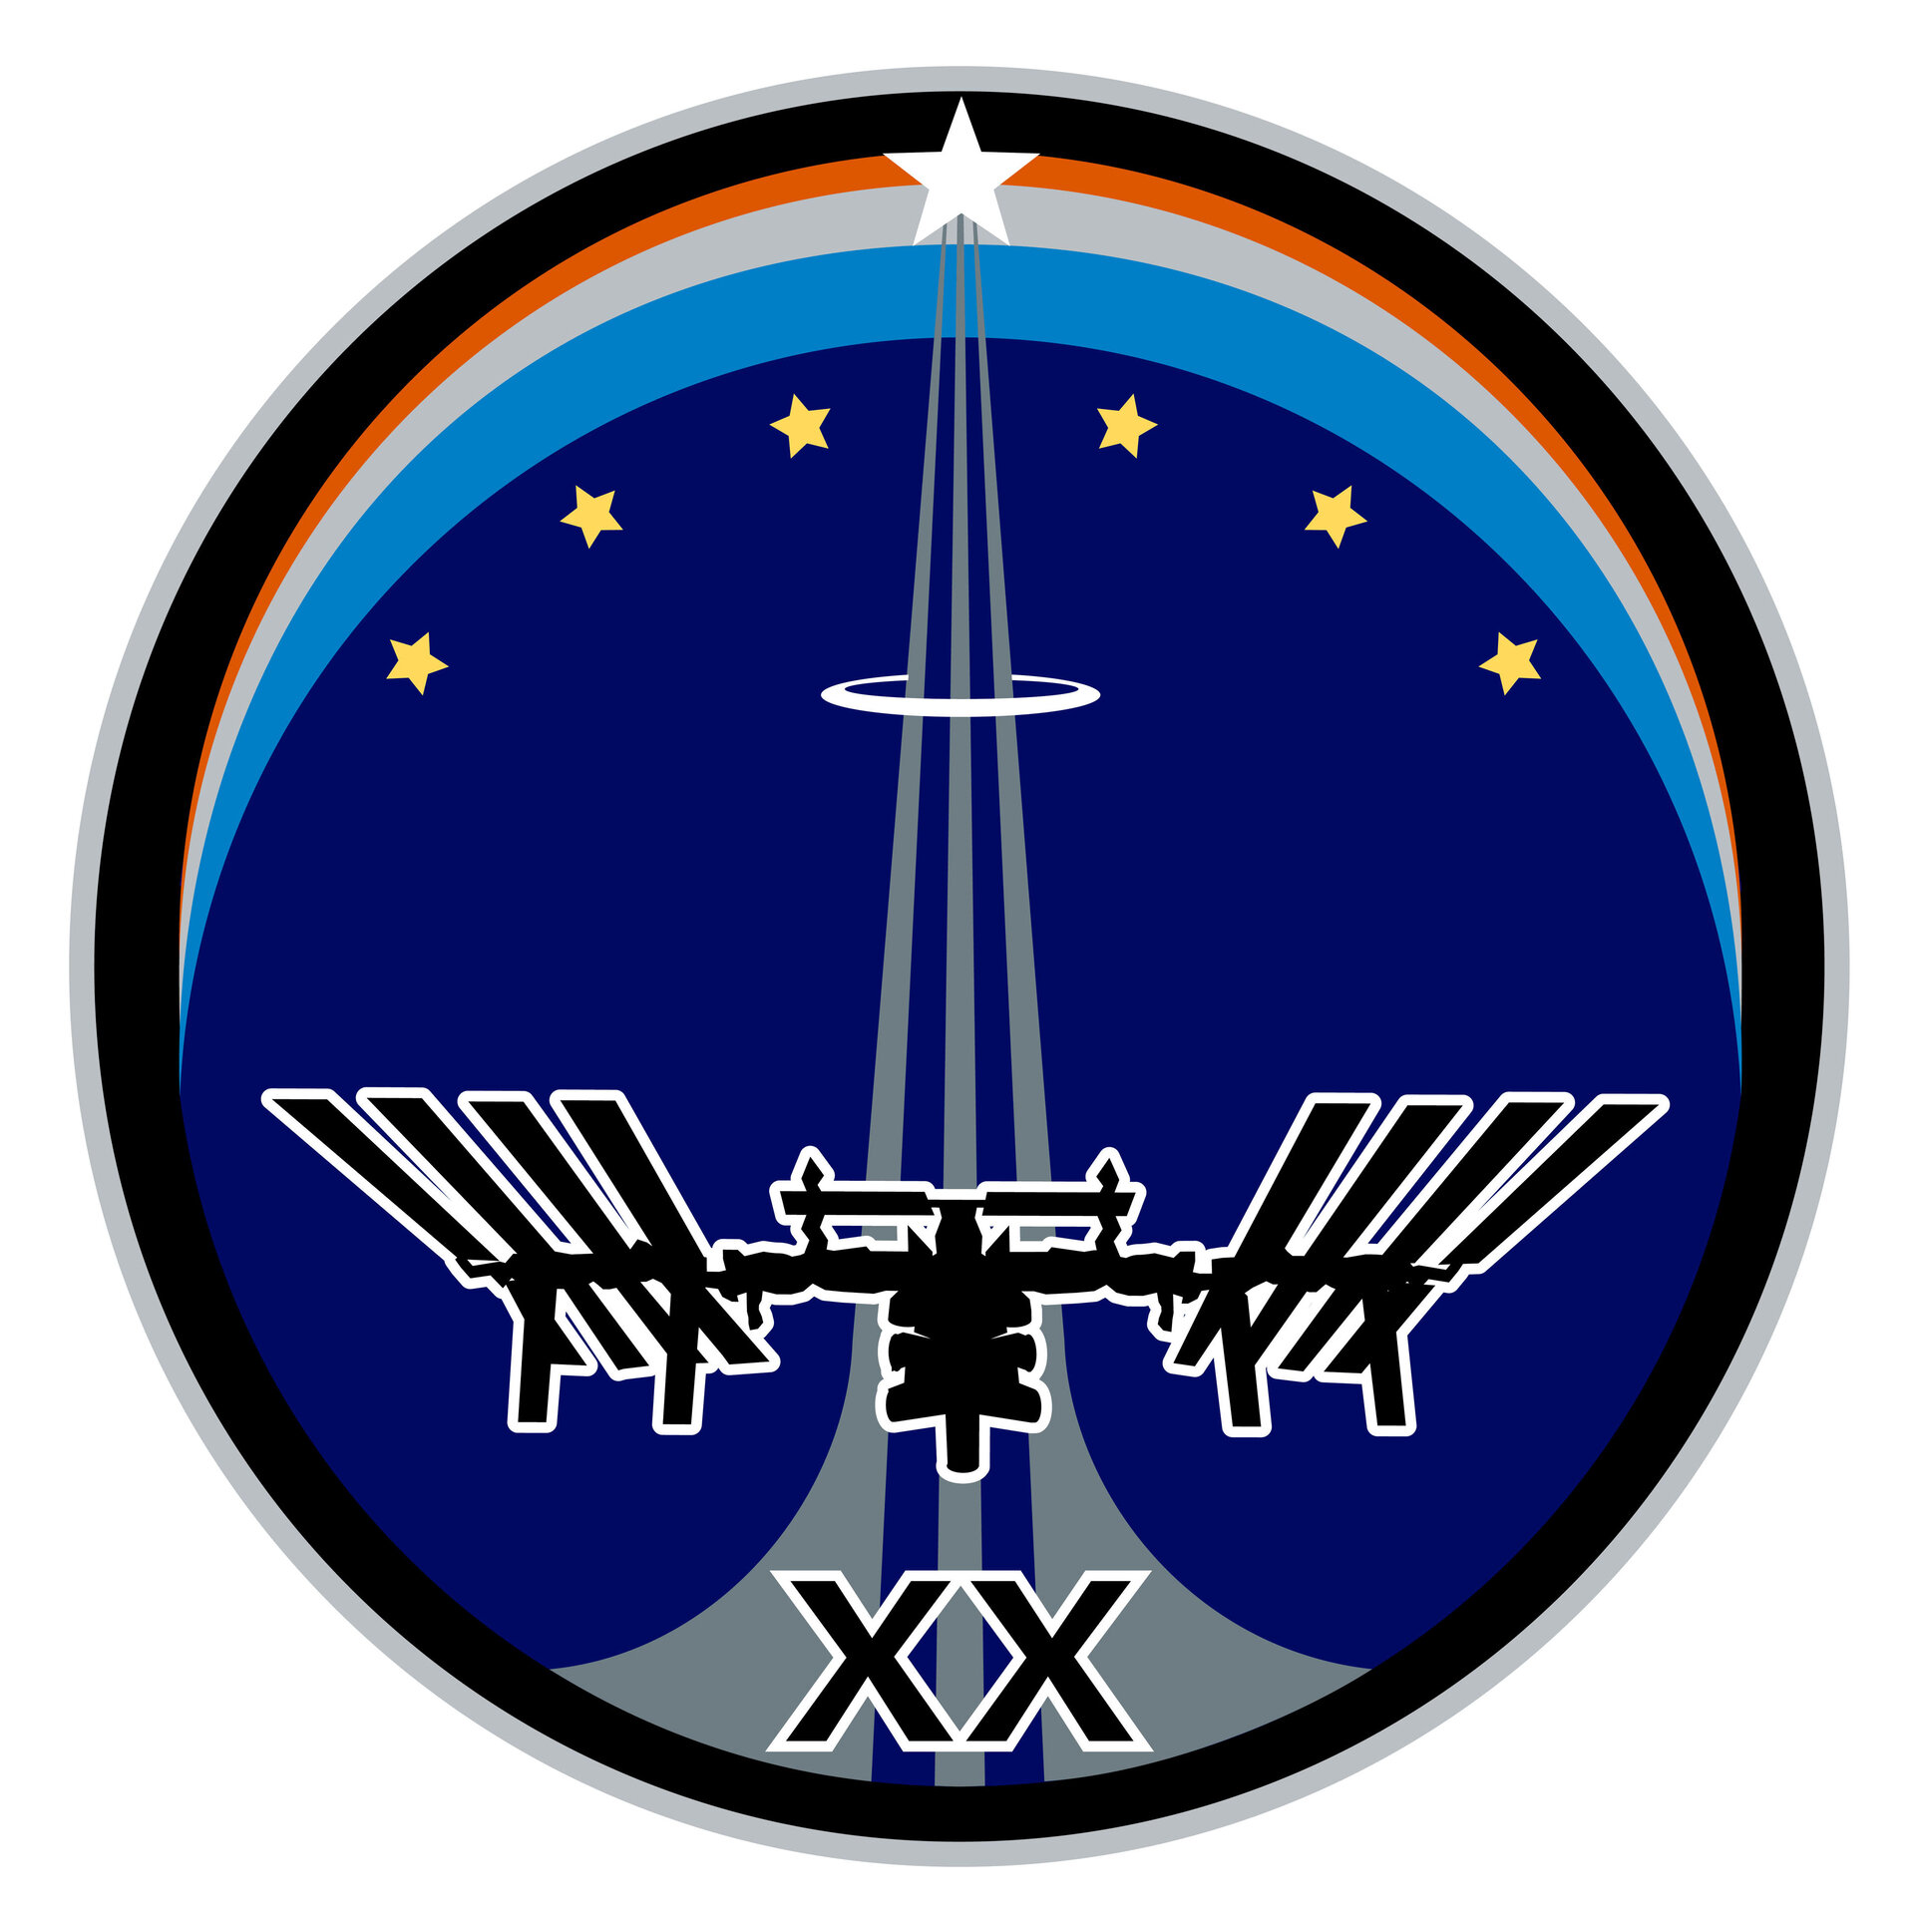 ISS Expedition 20 crew patch